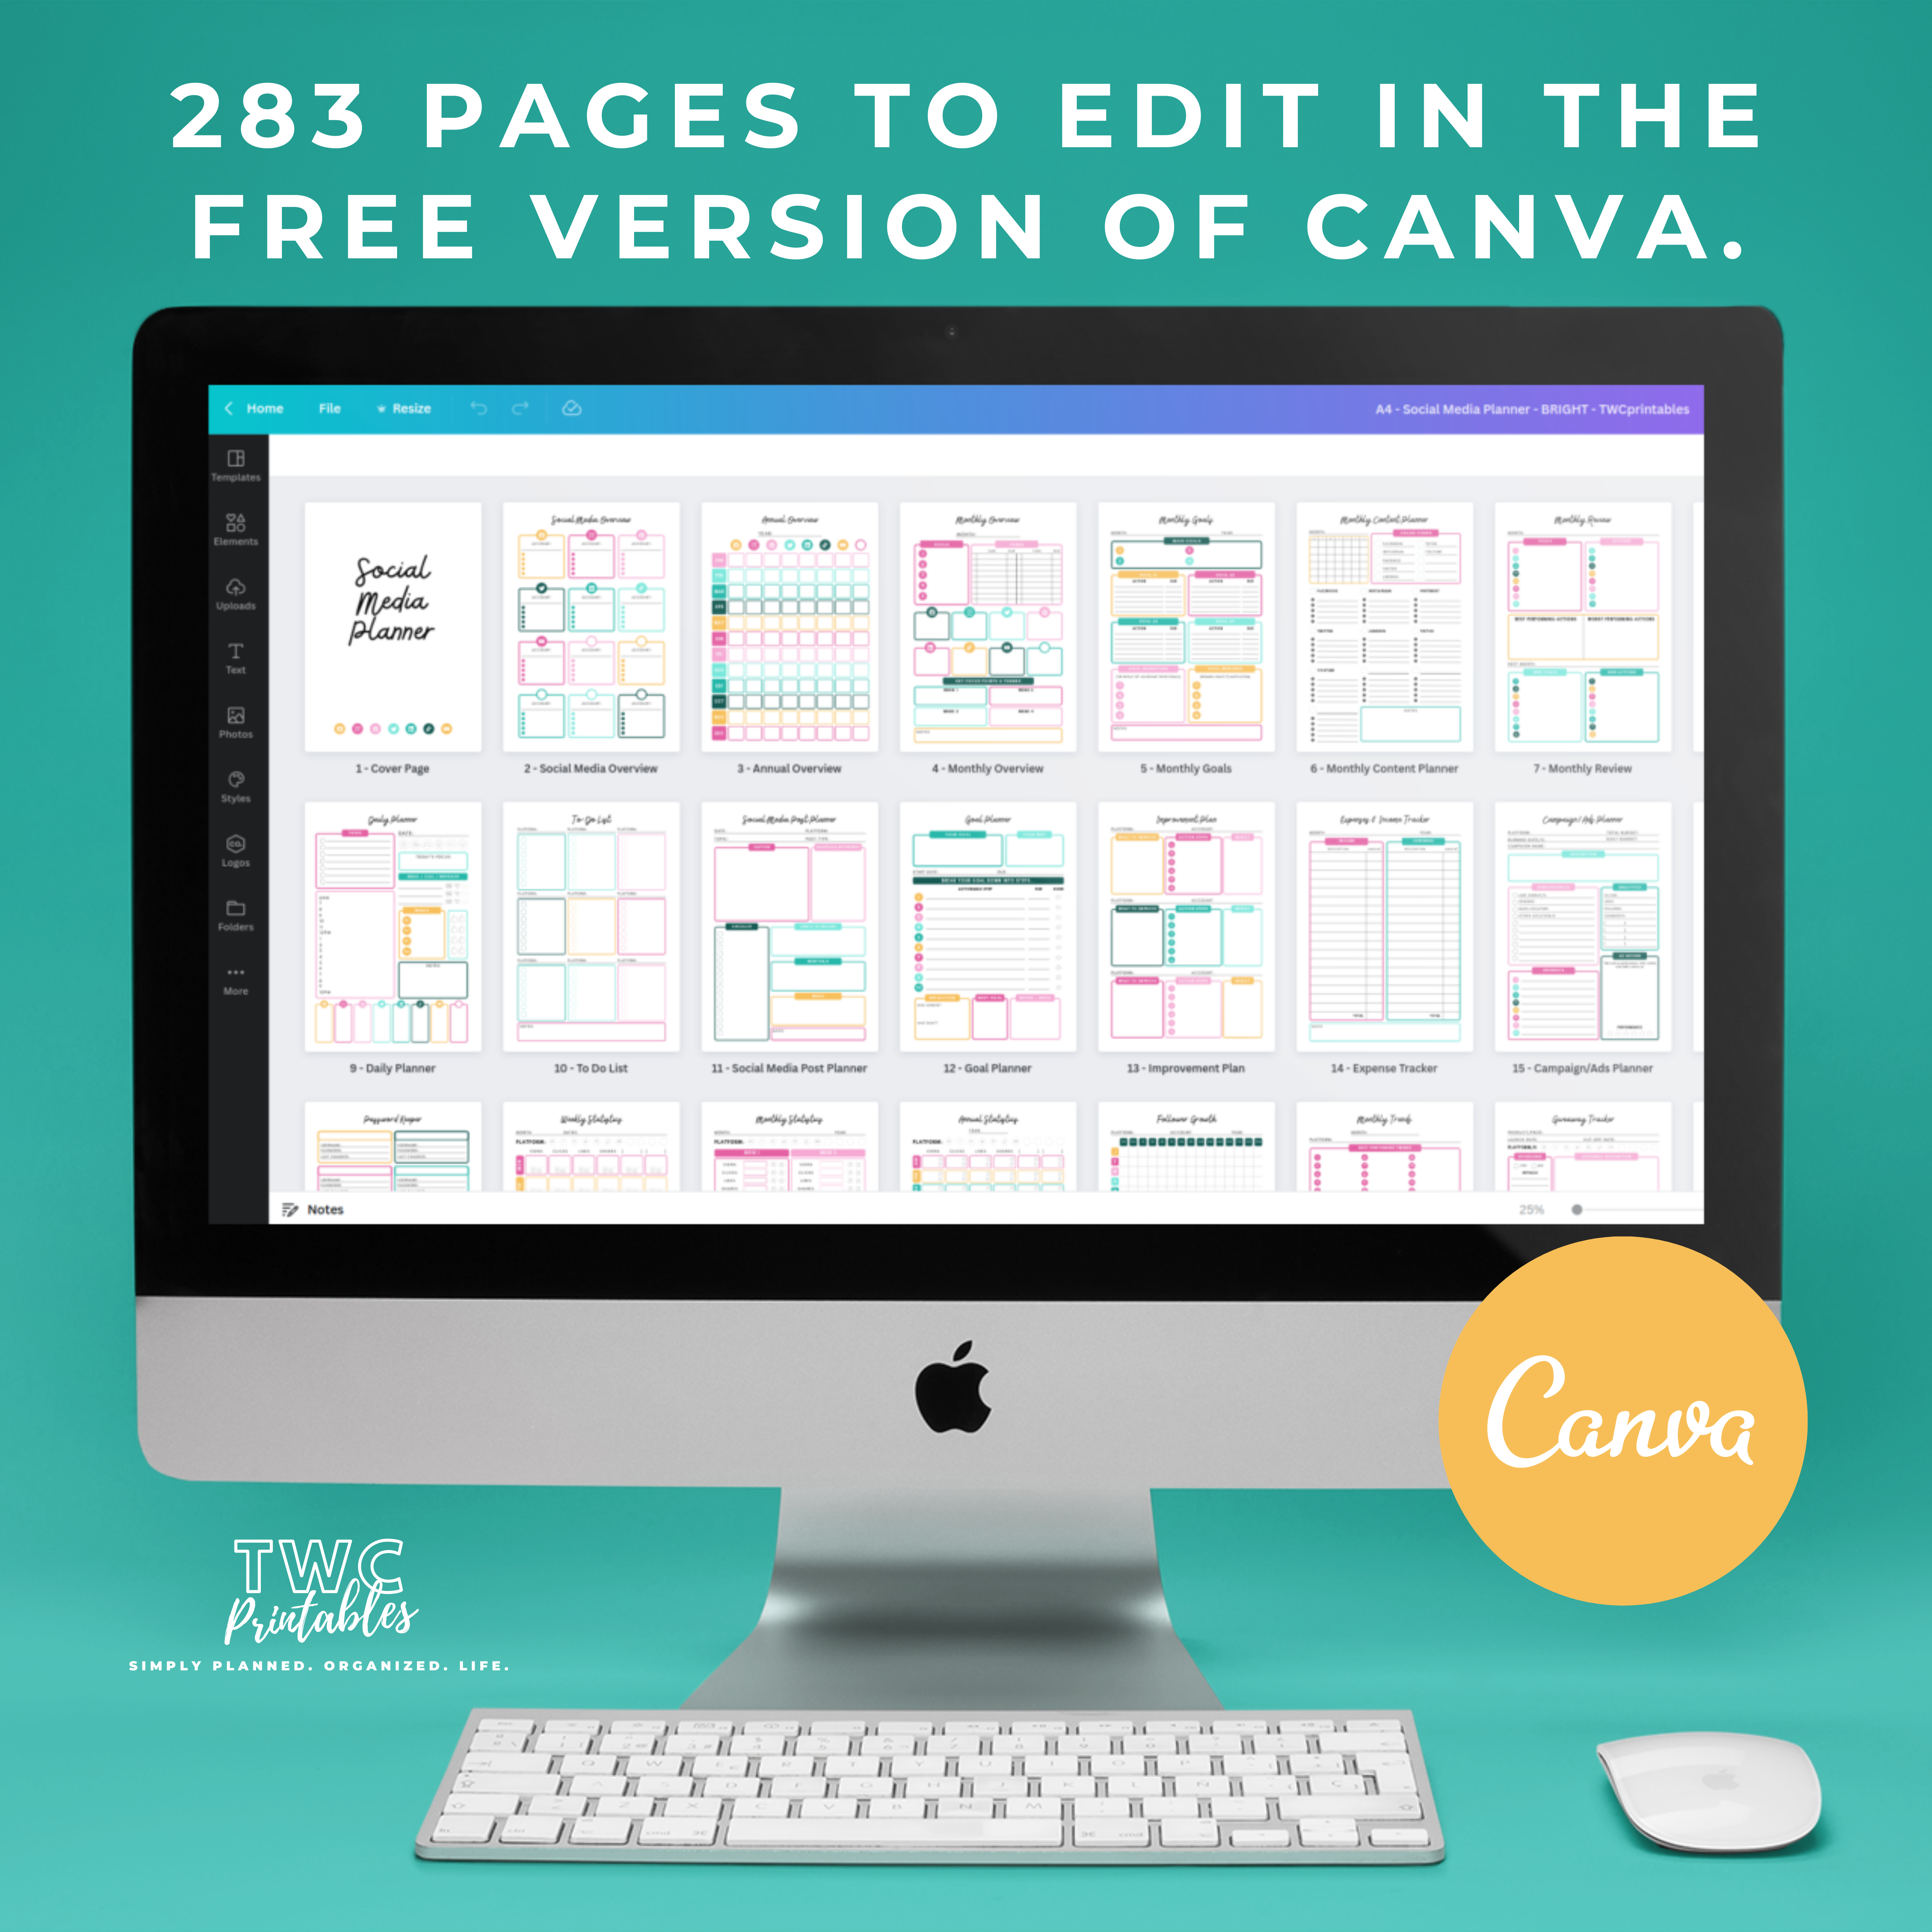 This is THE ULTIMATE Social Media Planner Canva Template! With over 250 pages, you can create all the planners you need for your social media accounts. Create your Pinterest Planner, YouTube Planner, and all other social platform planners for Instagram, Facebook, TikTok, LinkedIn, and Twitter. Using Social Media Canva templates means that you can change things around to suit your needs!